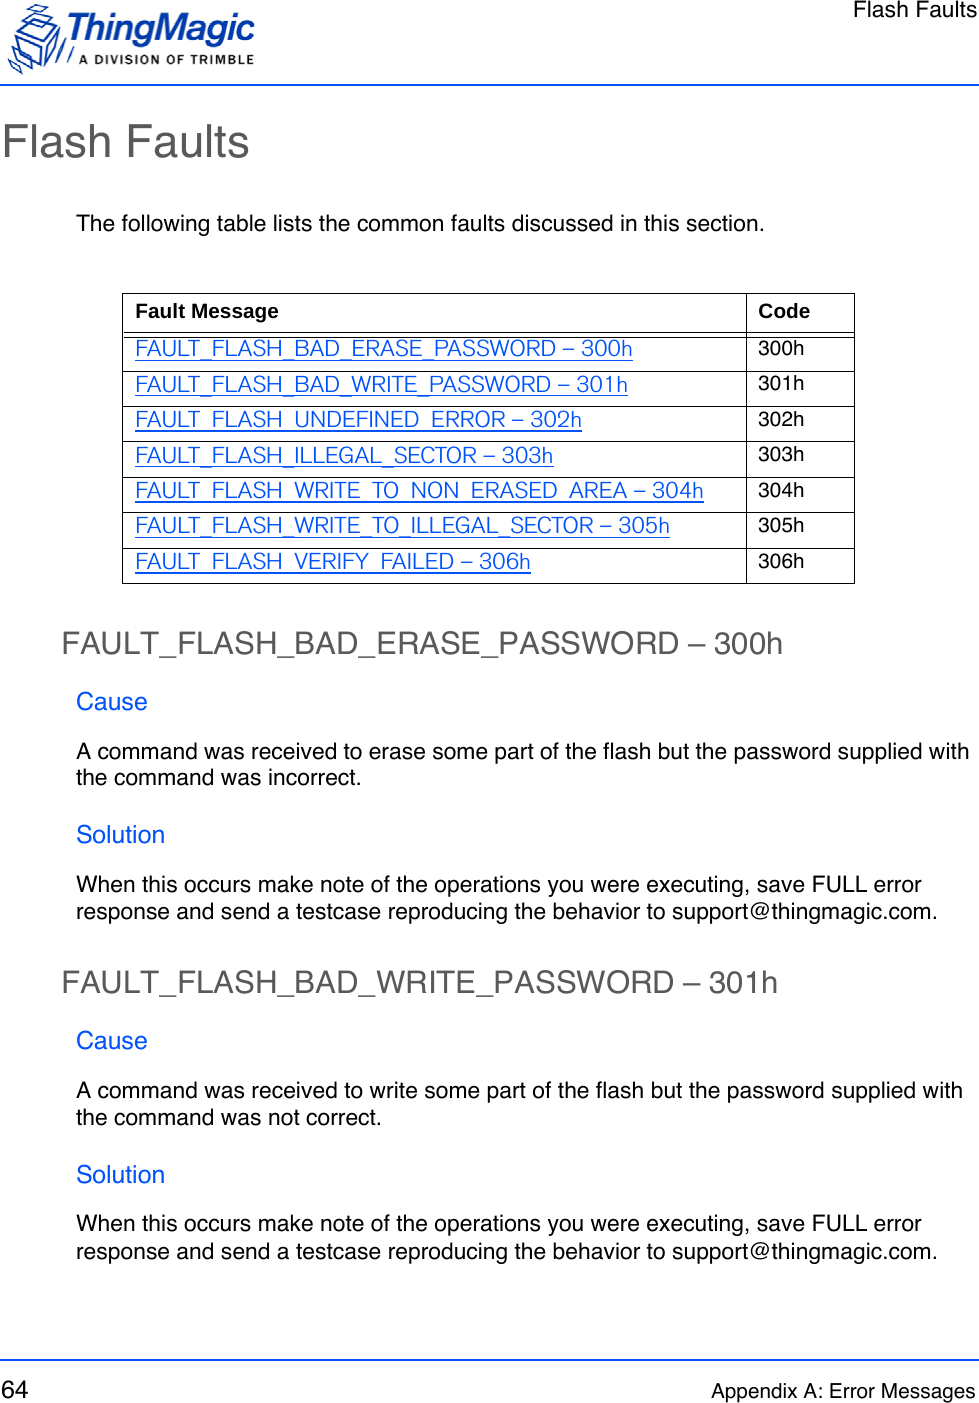 Flash Faults64 Appendix A: Error MessagesFlash FaultsThe following table lists the common faults discussed in this section.FAULT_FLASH_BAD_ERASE_PASSWORD – 300hCauseA command was received to erase some part of the flash but the password supplied with the command was incorrect.SolutionWhen this occurs make note of the operations you were executing, save FULL error response and send a testcase reproducing the behavior to support@thingmagic.com.FAULT_FLASH_BAD_WRITE_PASSWORD – 301hCauseA command was received to write some part of the flash but the password supplied with the command was not correct.SolutionWhen this occurs make note of the operations you were executing, save FULL error response and send a testcase reproducing the behavior to support@thingmagic.com.Fault Message CodeFAULT_FLASH_BAD_ERASE_PASSWORD – 300h 300hFAULT_FLASH_BAD_WRITE_PASSWORD – 301h 301hFAULT_FLASH_UNDEFINED_ERROR – 302h 302hFAULT_FLASH_ILLEGAL_SECTOR – 303h 303hFAULT_FLASH_WRITE_TO_NON_ERASED_AREA – 304h 304hFAULT_FLASH_WRITE_TO_ILLEGAL_SECTOR – 305h 305hFAULT_FLASH_VERIFY_FAILED – 306h 306h